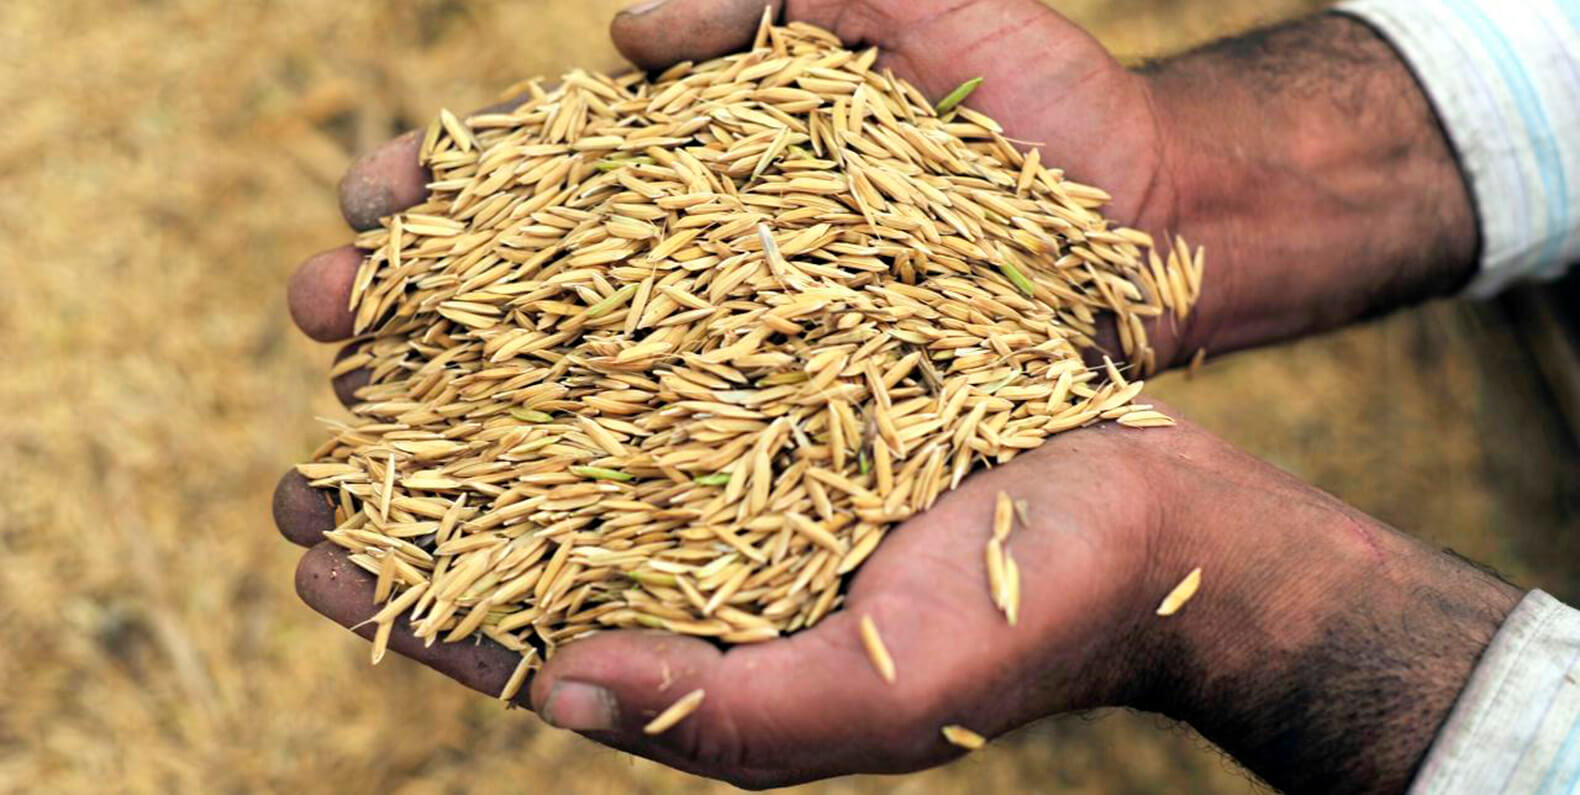 Indonesian Rice Husk is used as energy such as Biomass